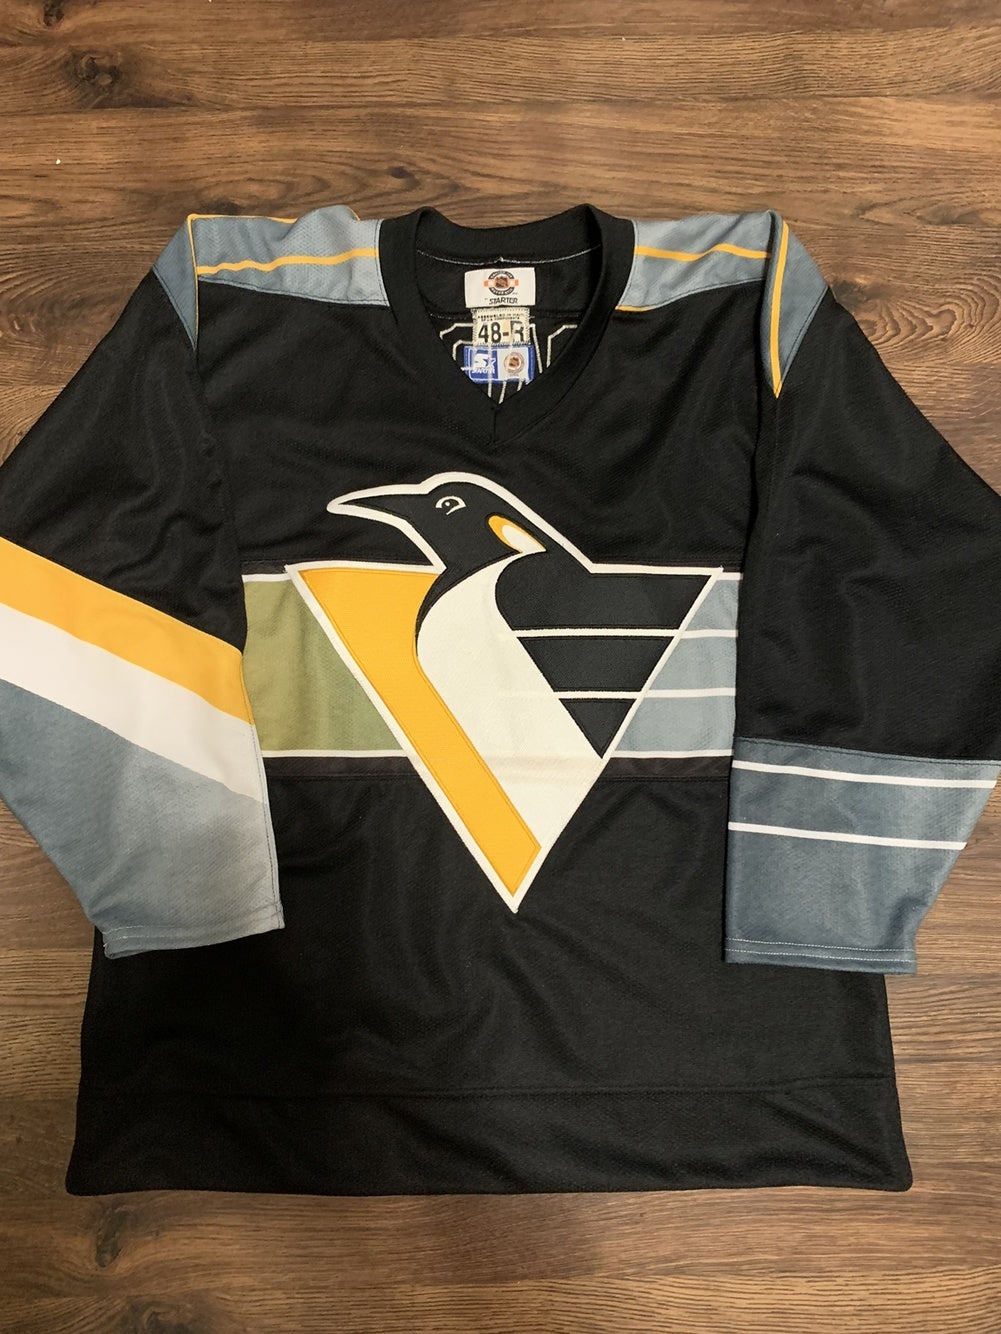 Pro Knitwear turned this blank jersey into a work of artI love it! : r/ penguins